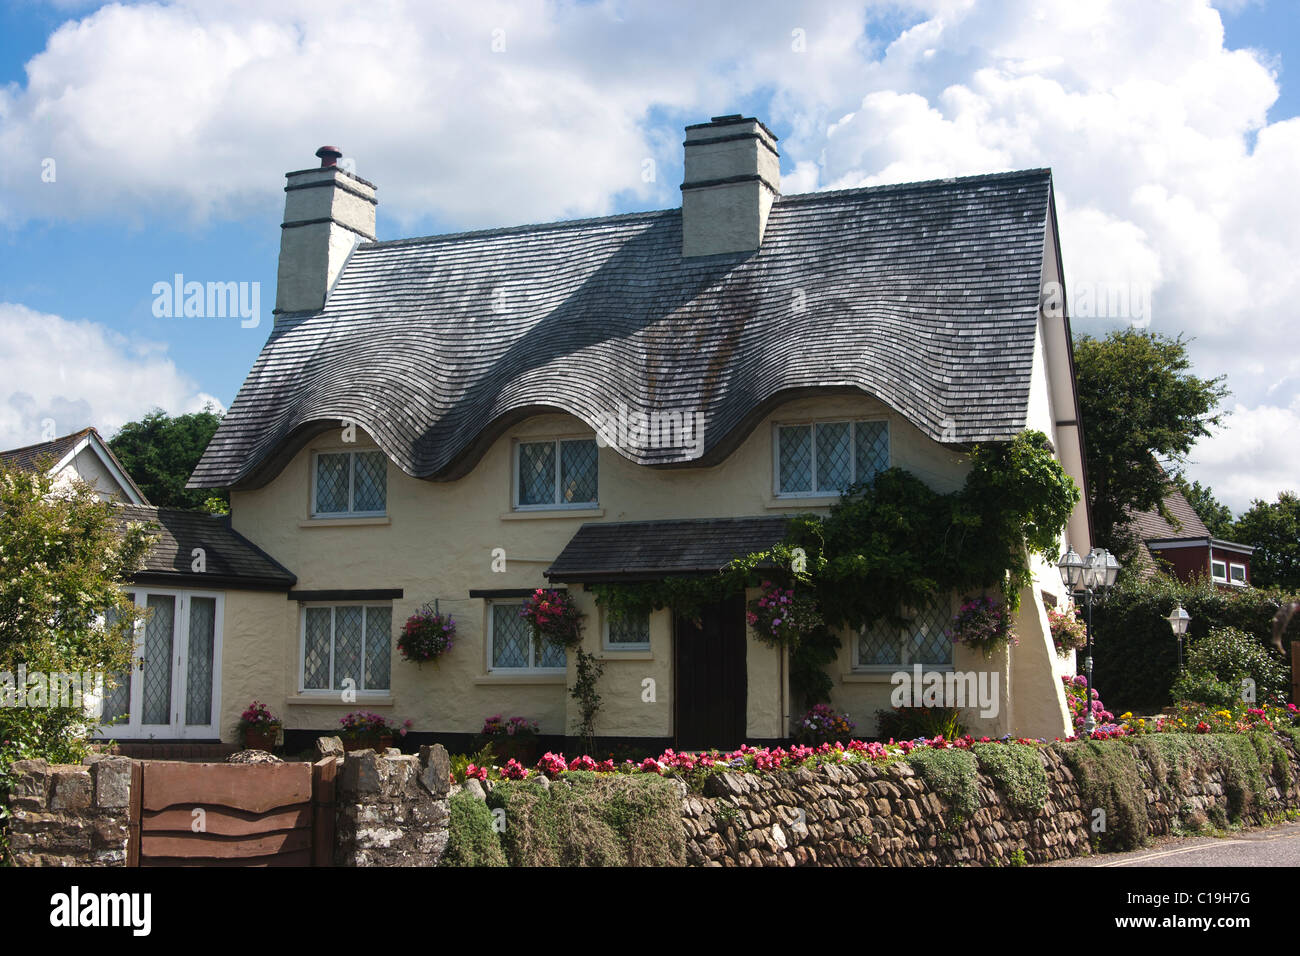 House in Croyde, North Devon, with wavy tiled roof in imitation of thatch Stock Photo